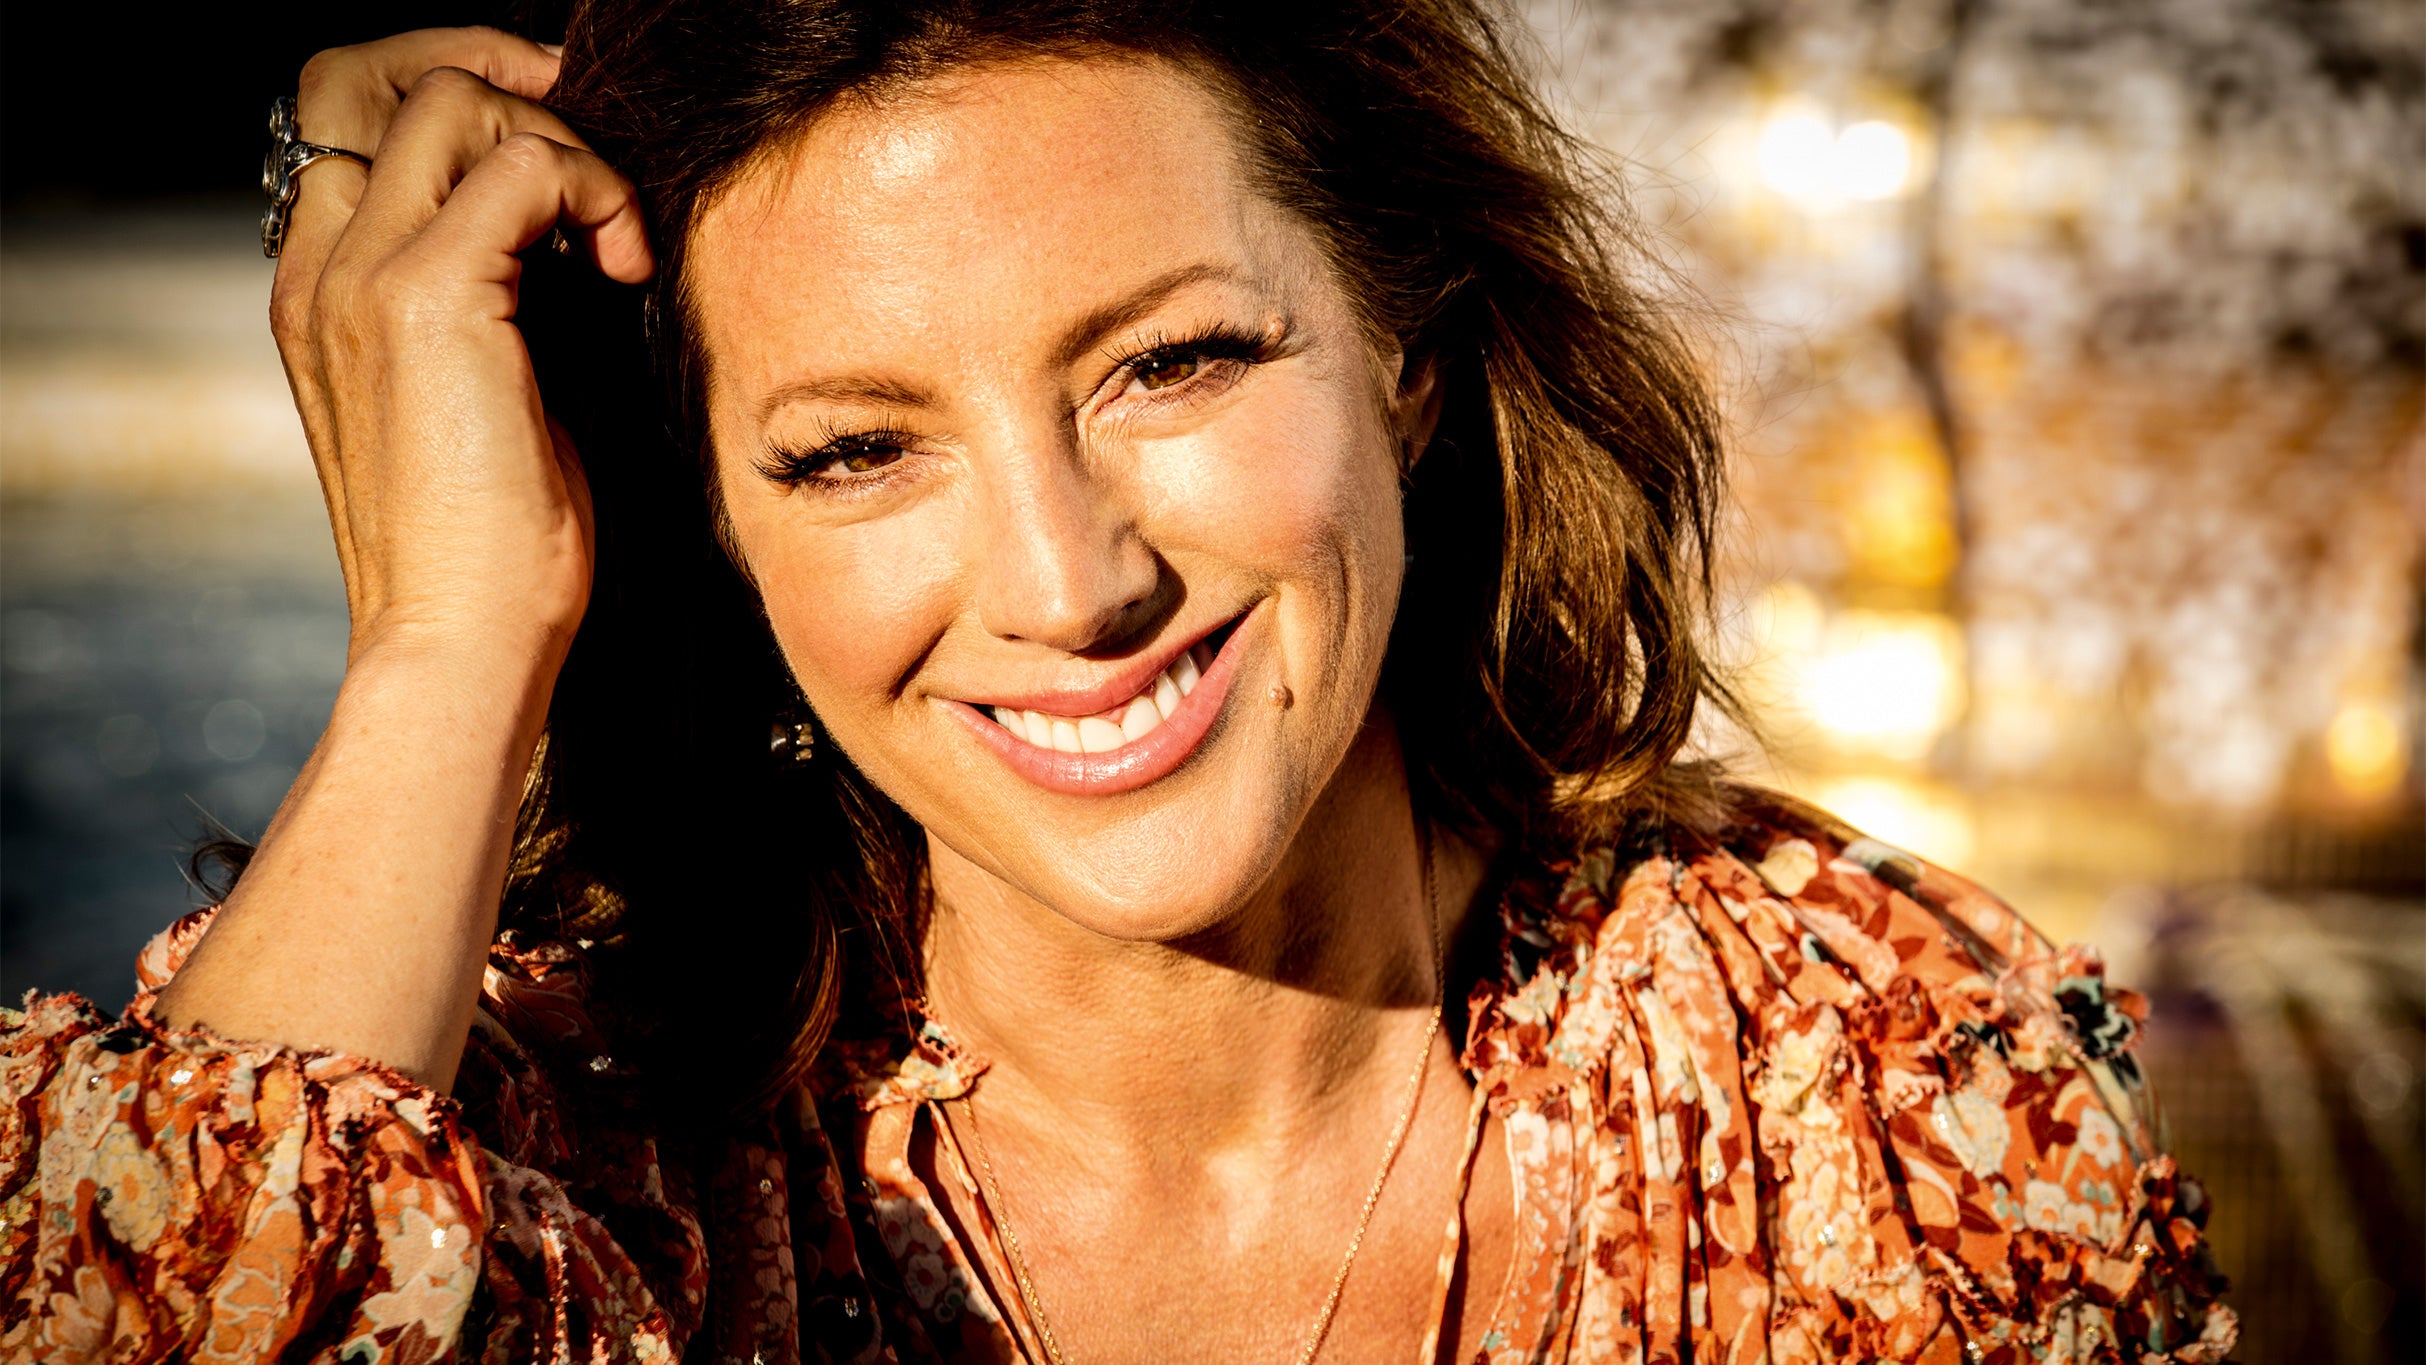 Sarah McLachlan - Fumbling Towards Ecstasy 30th Anniversary Tour presale code for concert tickets in Edmonton, AB (Rogers Place)